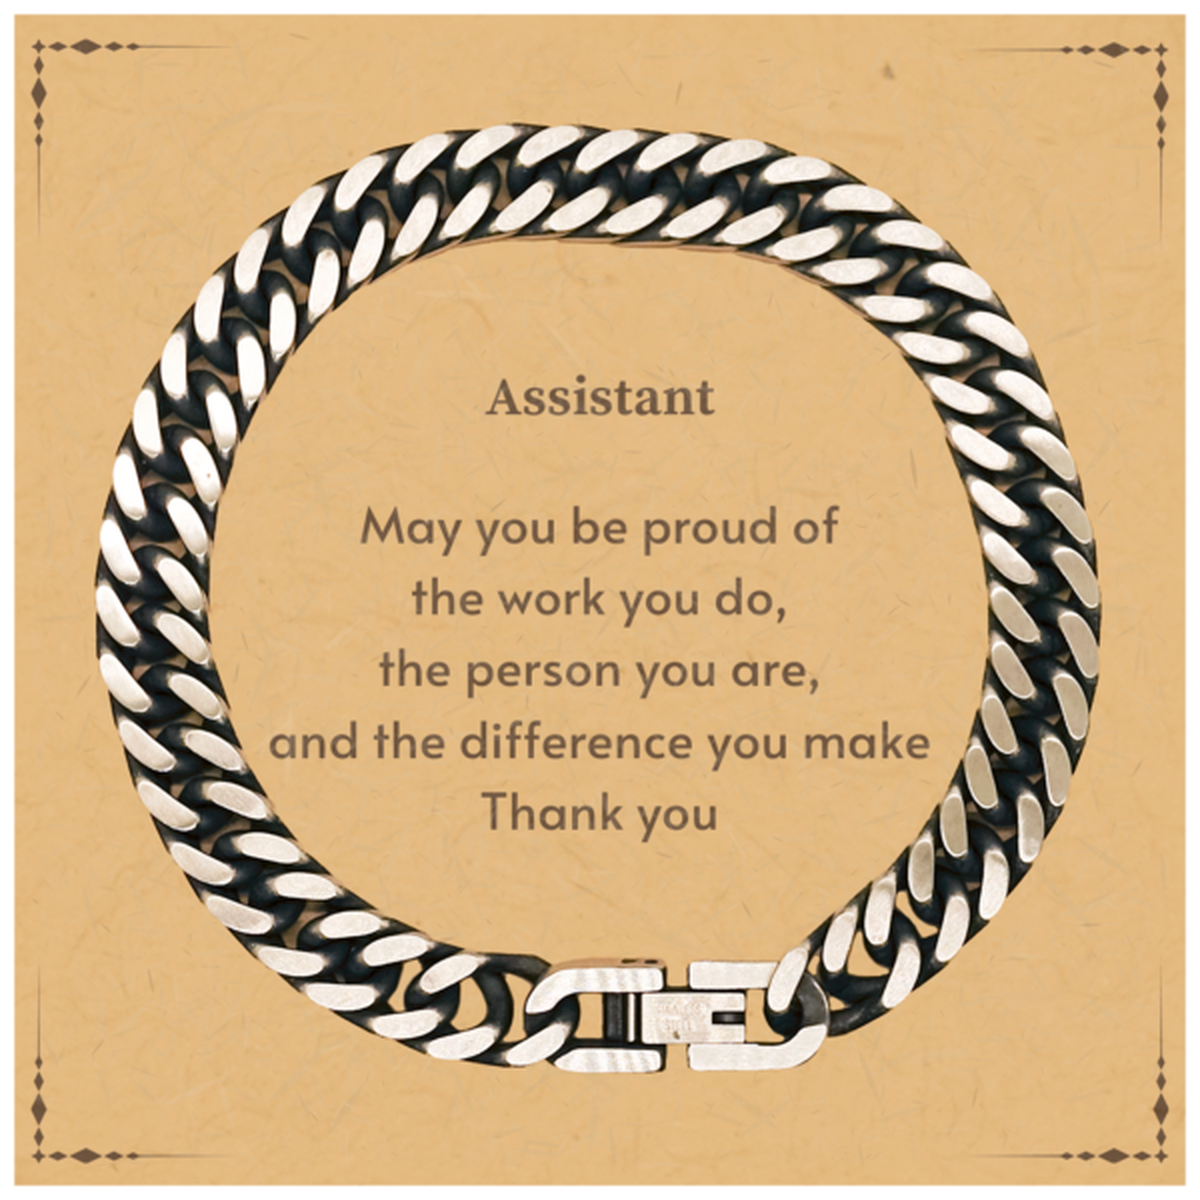 Heartwarming Cuban Link Chain Bracelet Retirement Coworkers Gifts for Assistant, Assistant May You be proud of the work you do, the person you are Gifts for Boss Men Women Friends